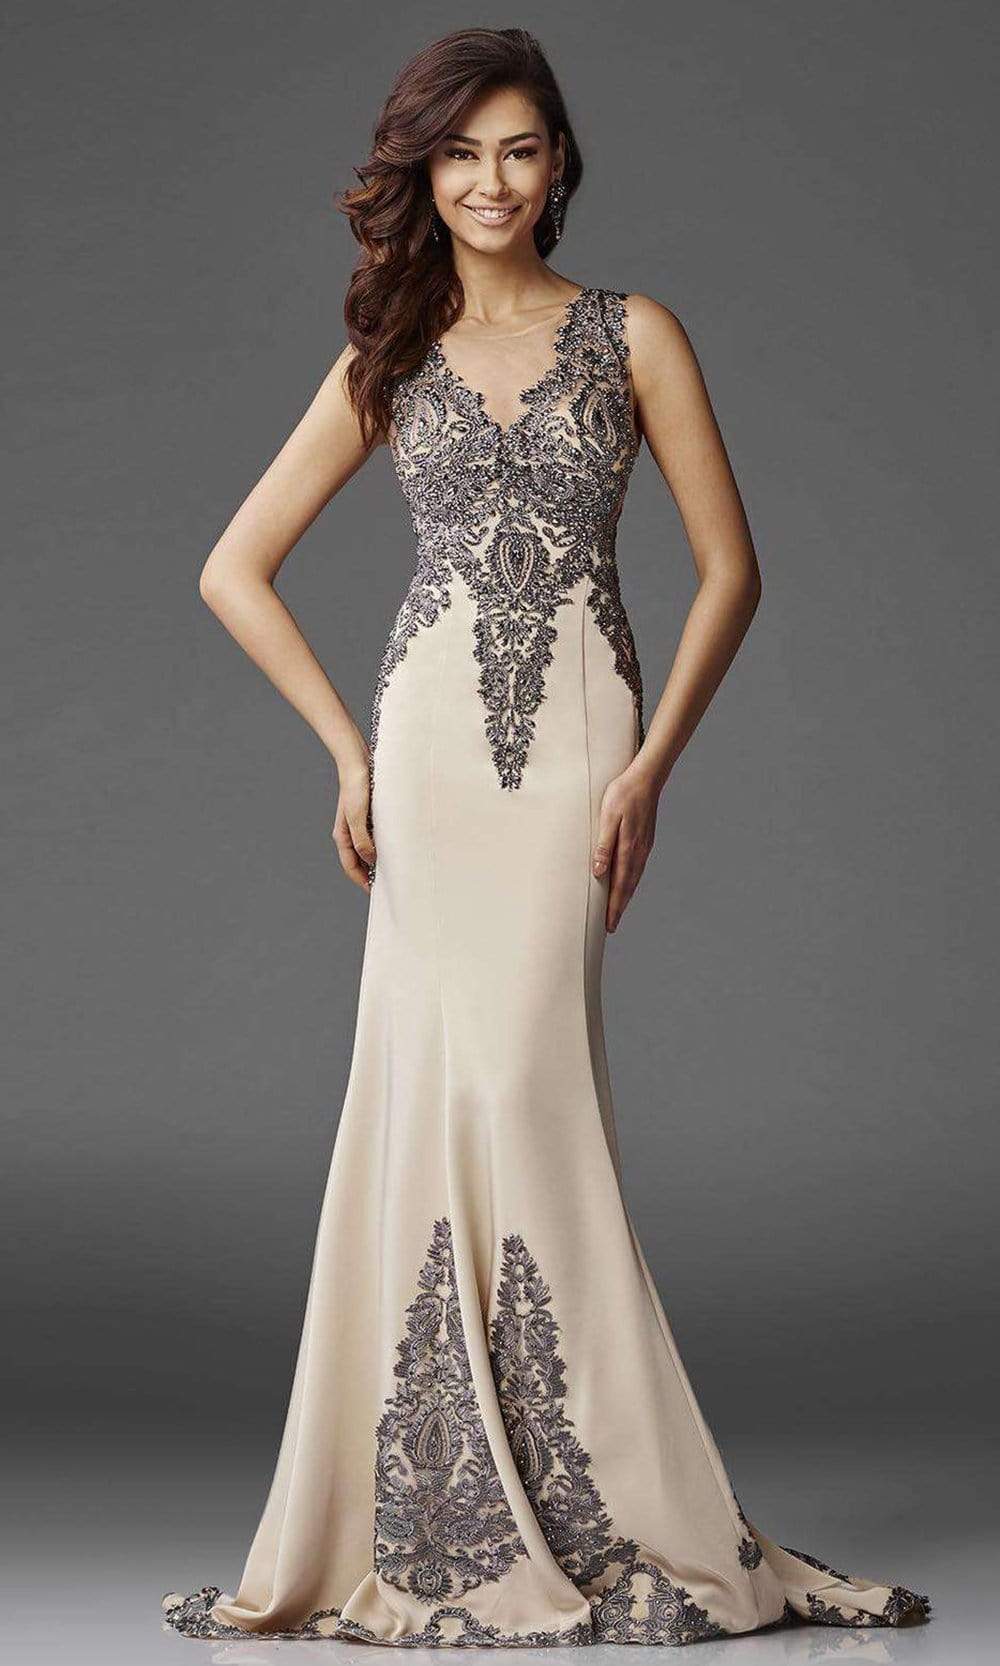 Clarisse - M6419 Intricate Embellished Lace Sheath Gown